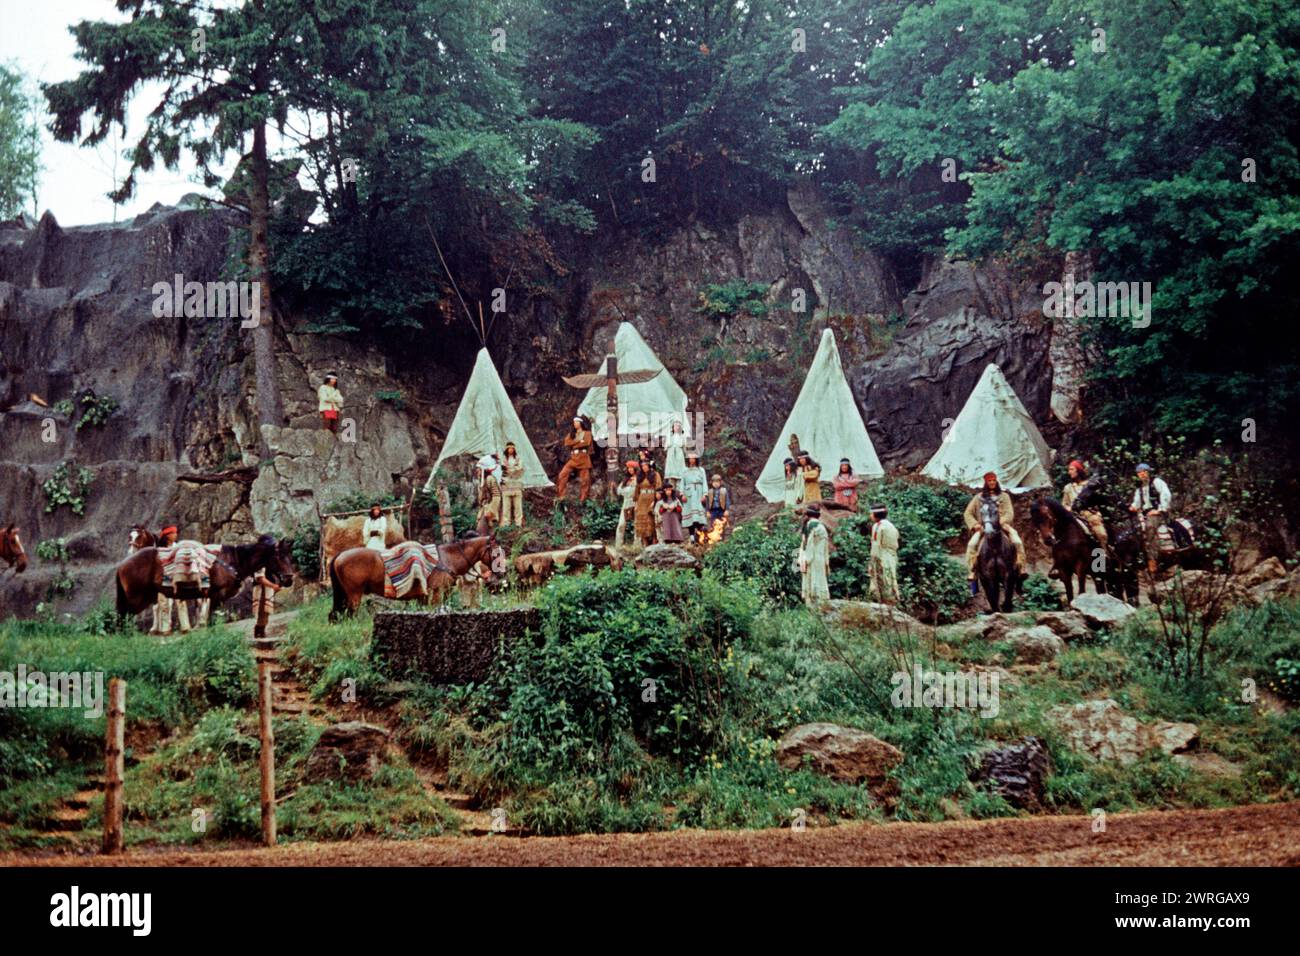 Actors and tents in the play Der Schatz im Silbersee by Karl May, open-air theatre Elspe, Sauerland, North Rhine-Westphalia, Germany, June 1982 Stock Photo